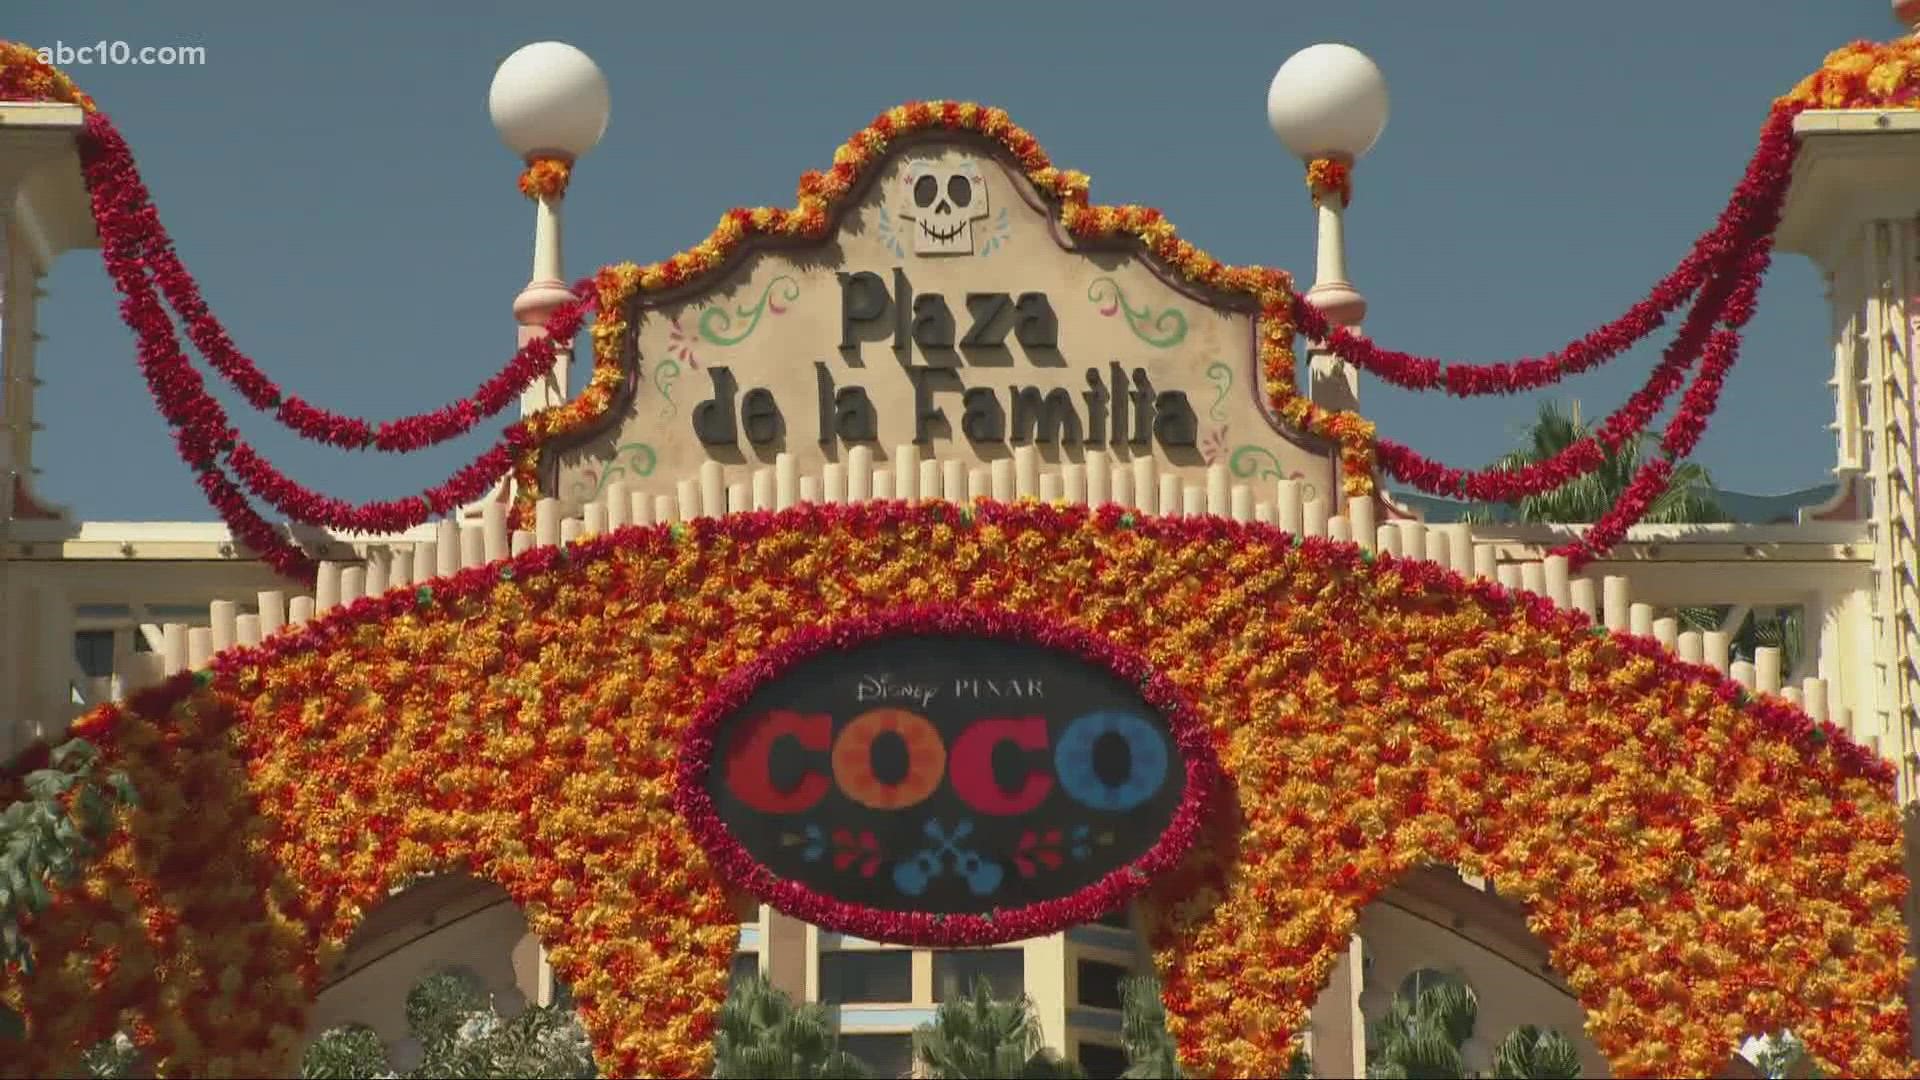 As Disneyland gears up to return for the holidays, join the characters from "Coco" as the park celebrates Día de los Muertos.